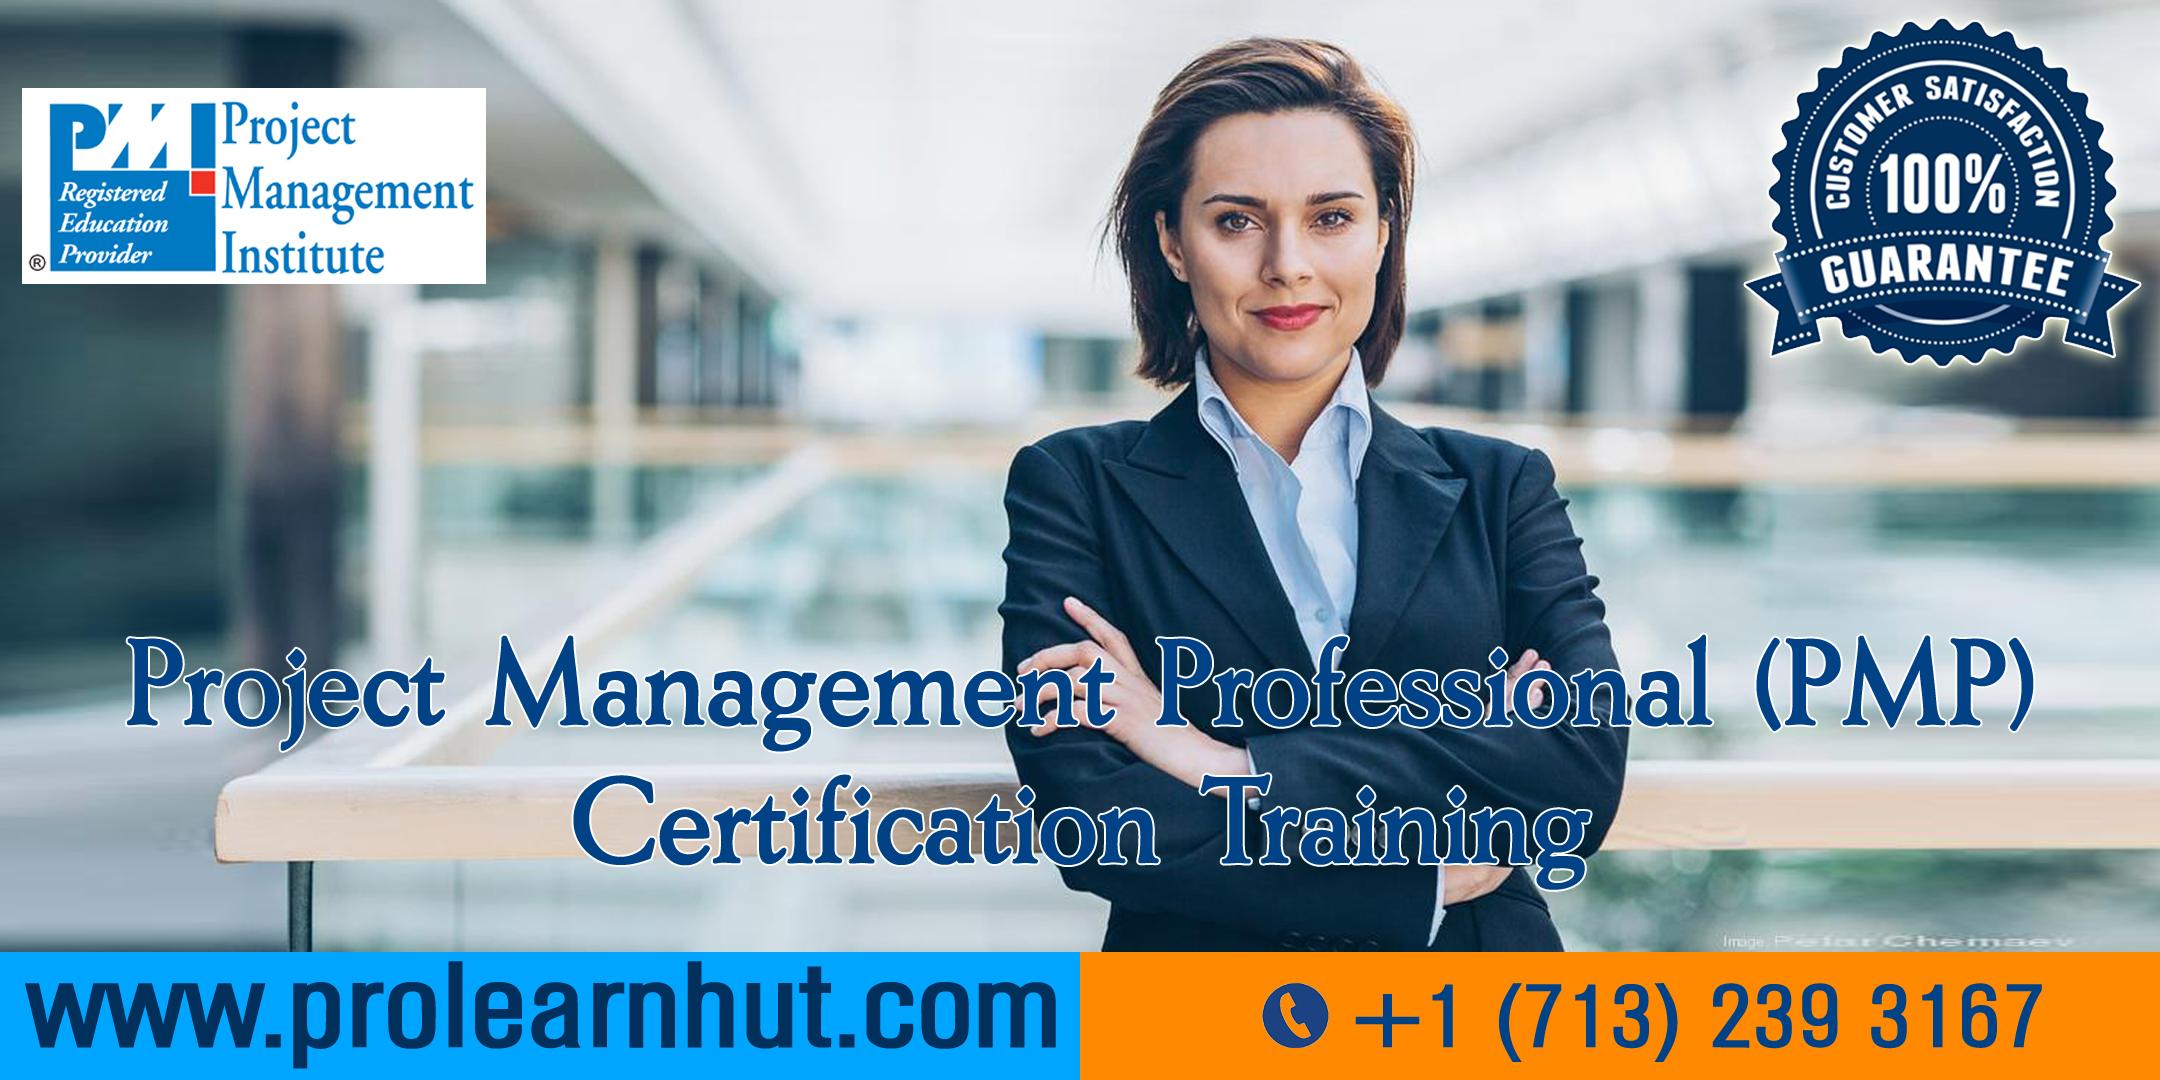 PMP Certification | Project Management Certification| PMP Training in Fullerton, CA | ProLearnHut